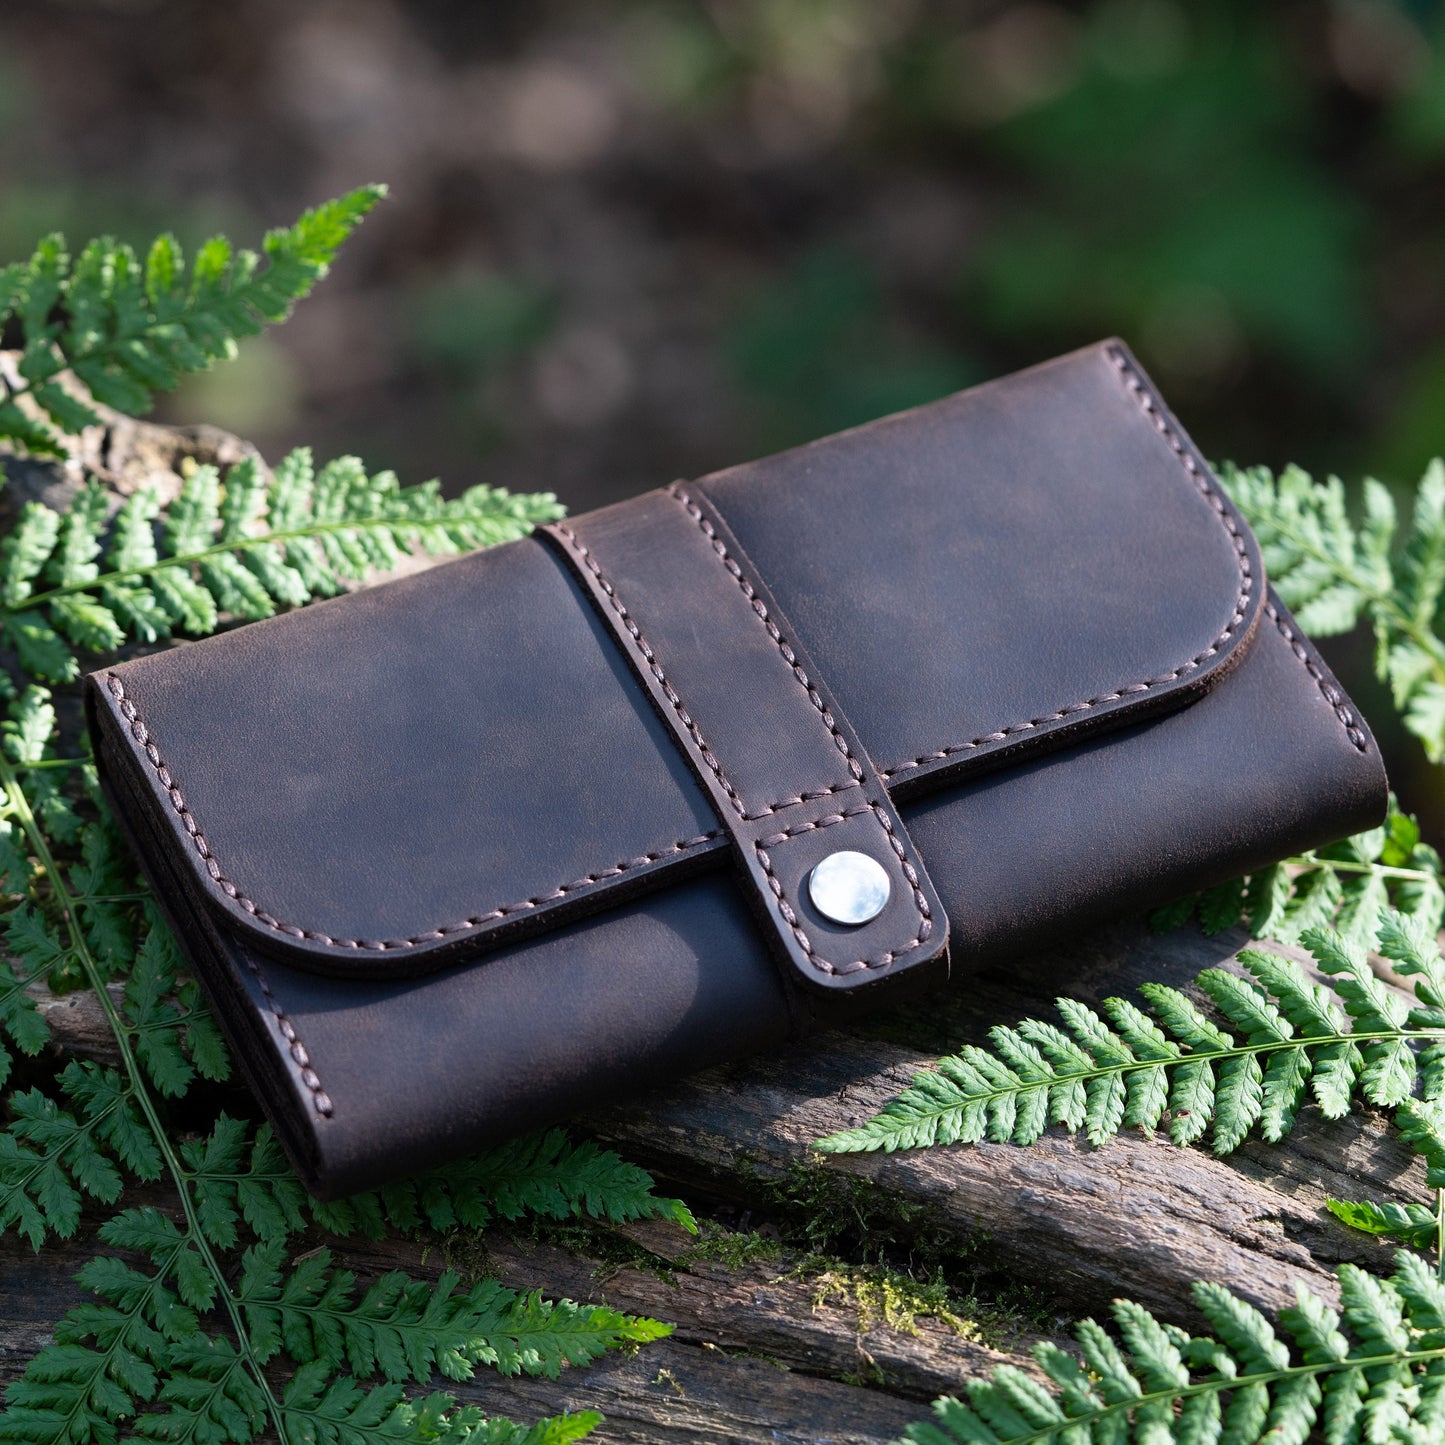 Leather Wallet Genuine | Travel Wallet | Zip coin pouch | Handmade, Anniversary, Birthday Gift for Women